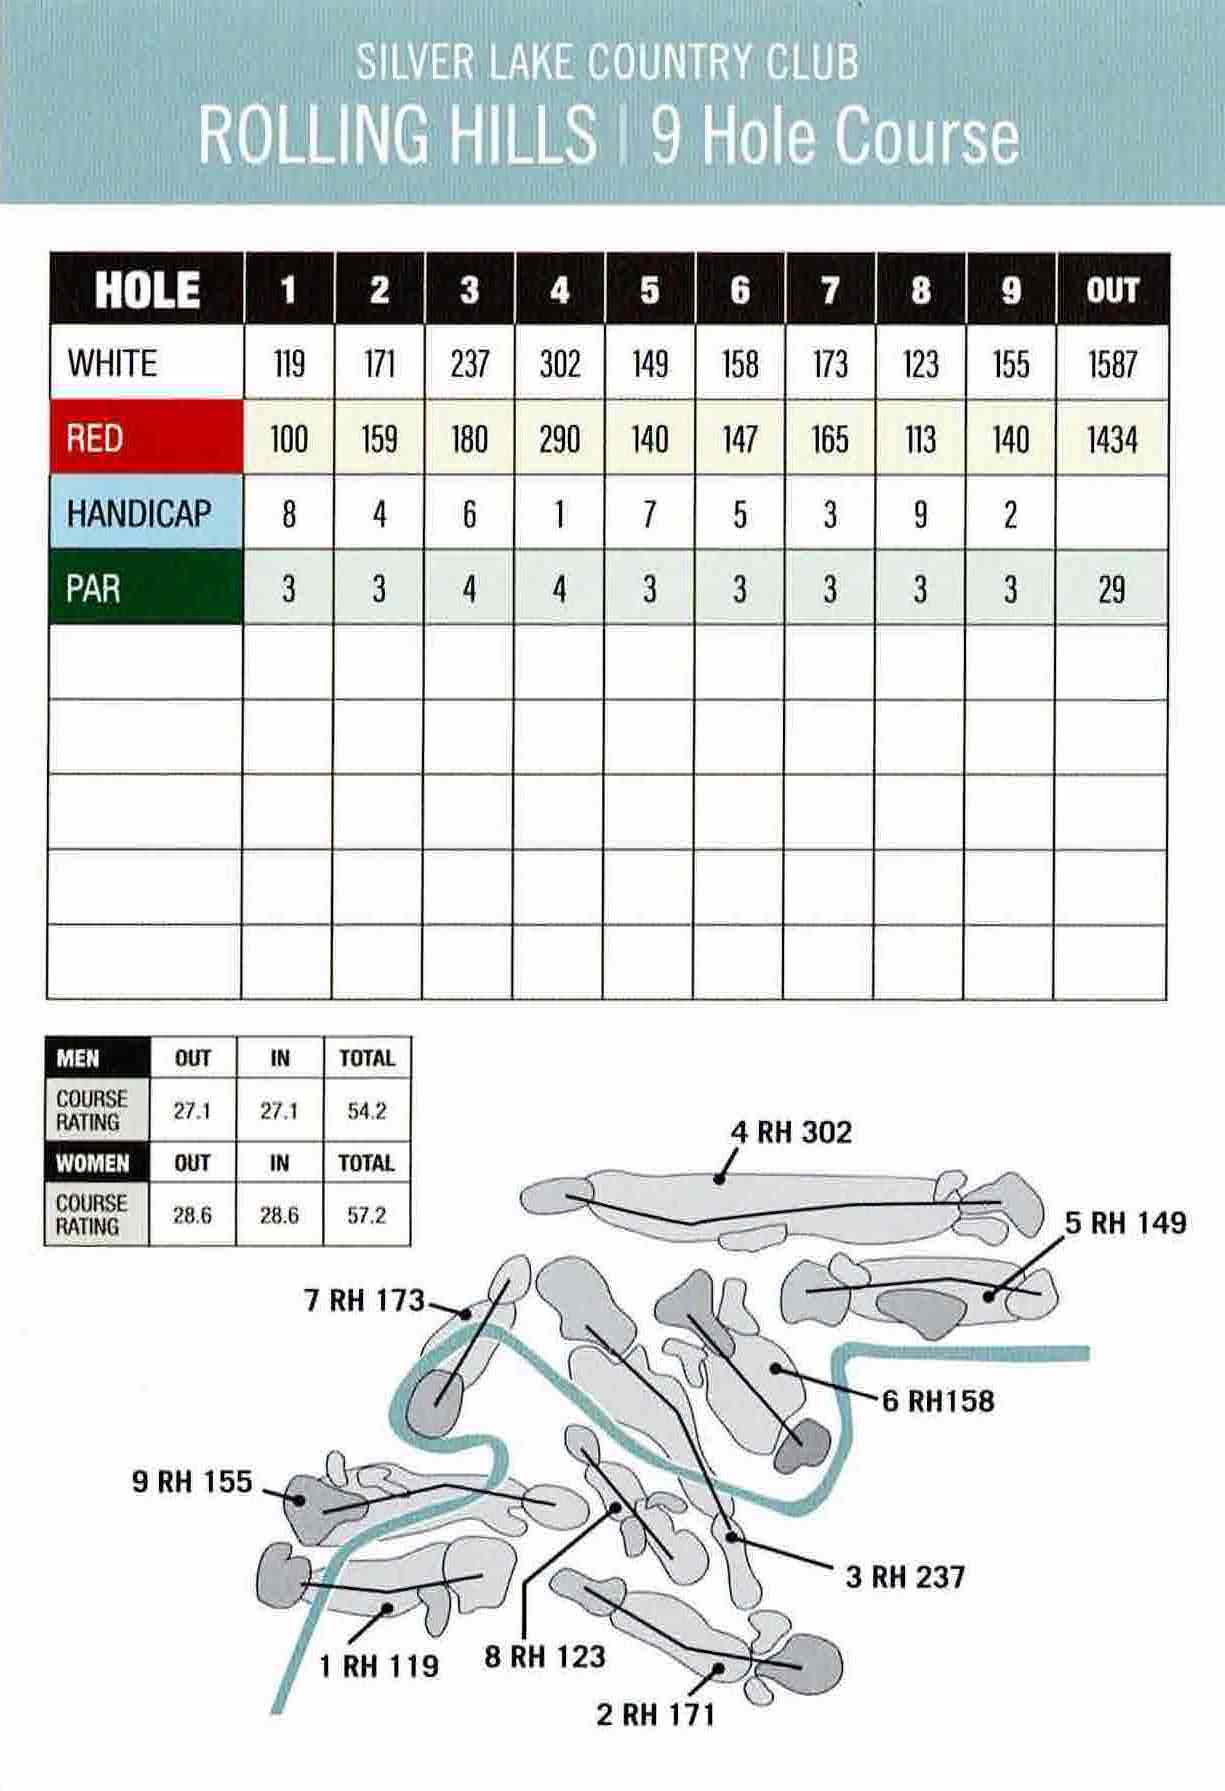 Scan of the scorecard from Silver Lake Rolling Hills Course in Orland Park, Illinois. 